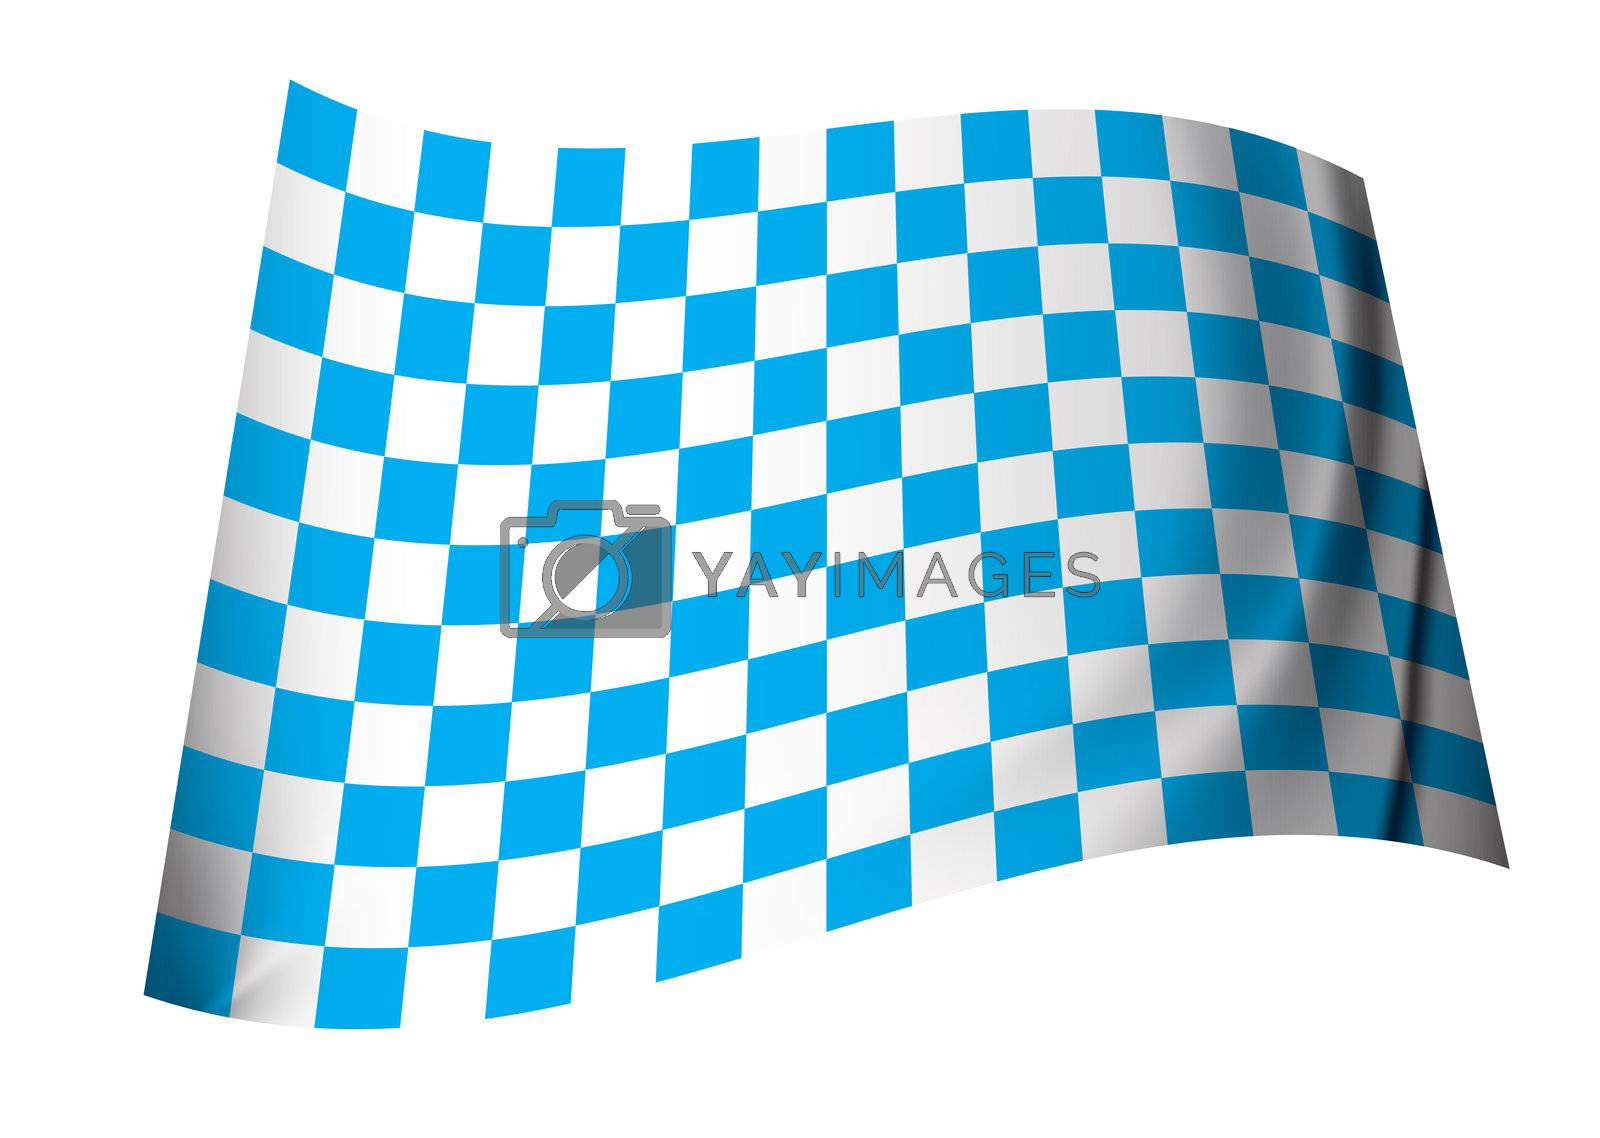 Stock Photos, Royalty Free Images, Vectors, Footage | Yayimages Repeating Checkered Flag Background